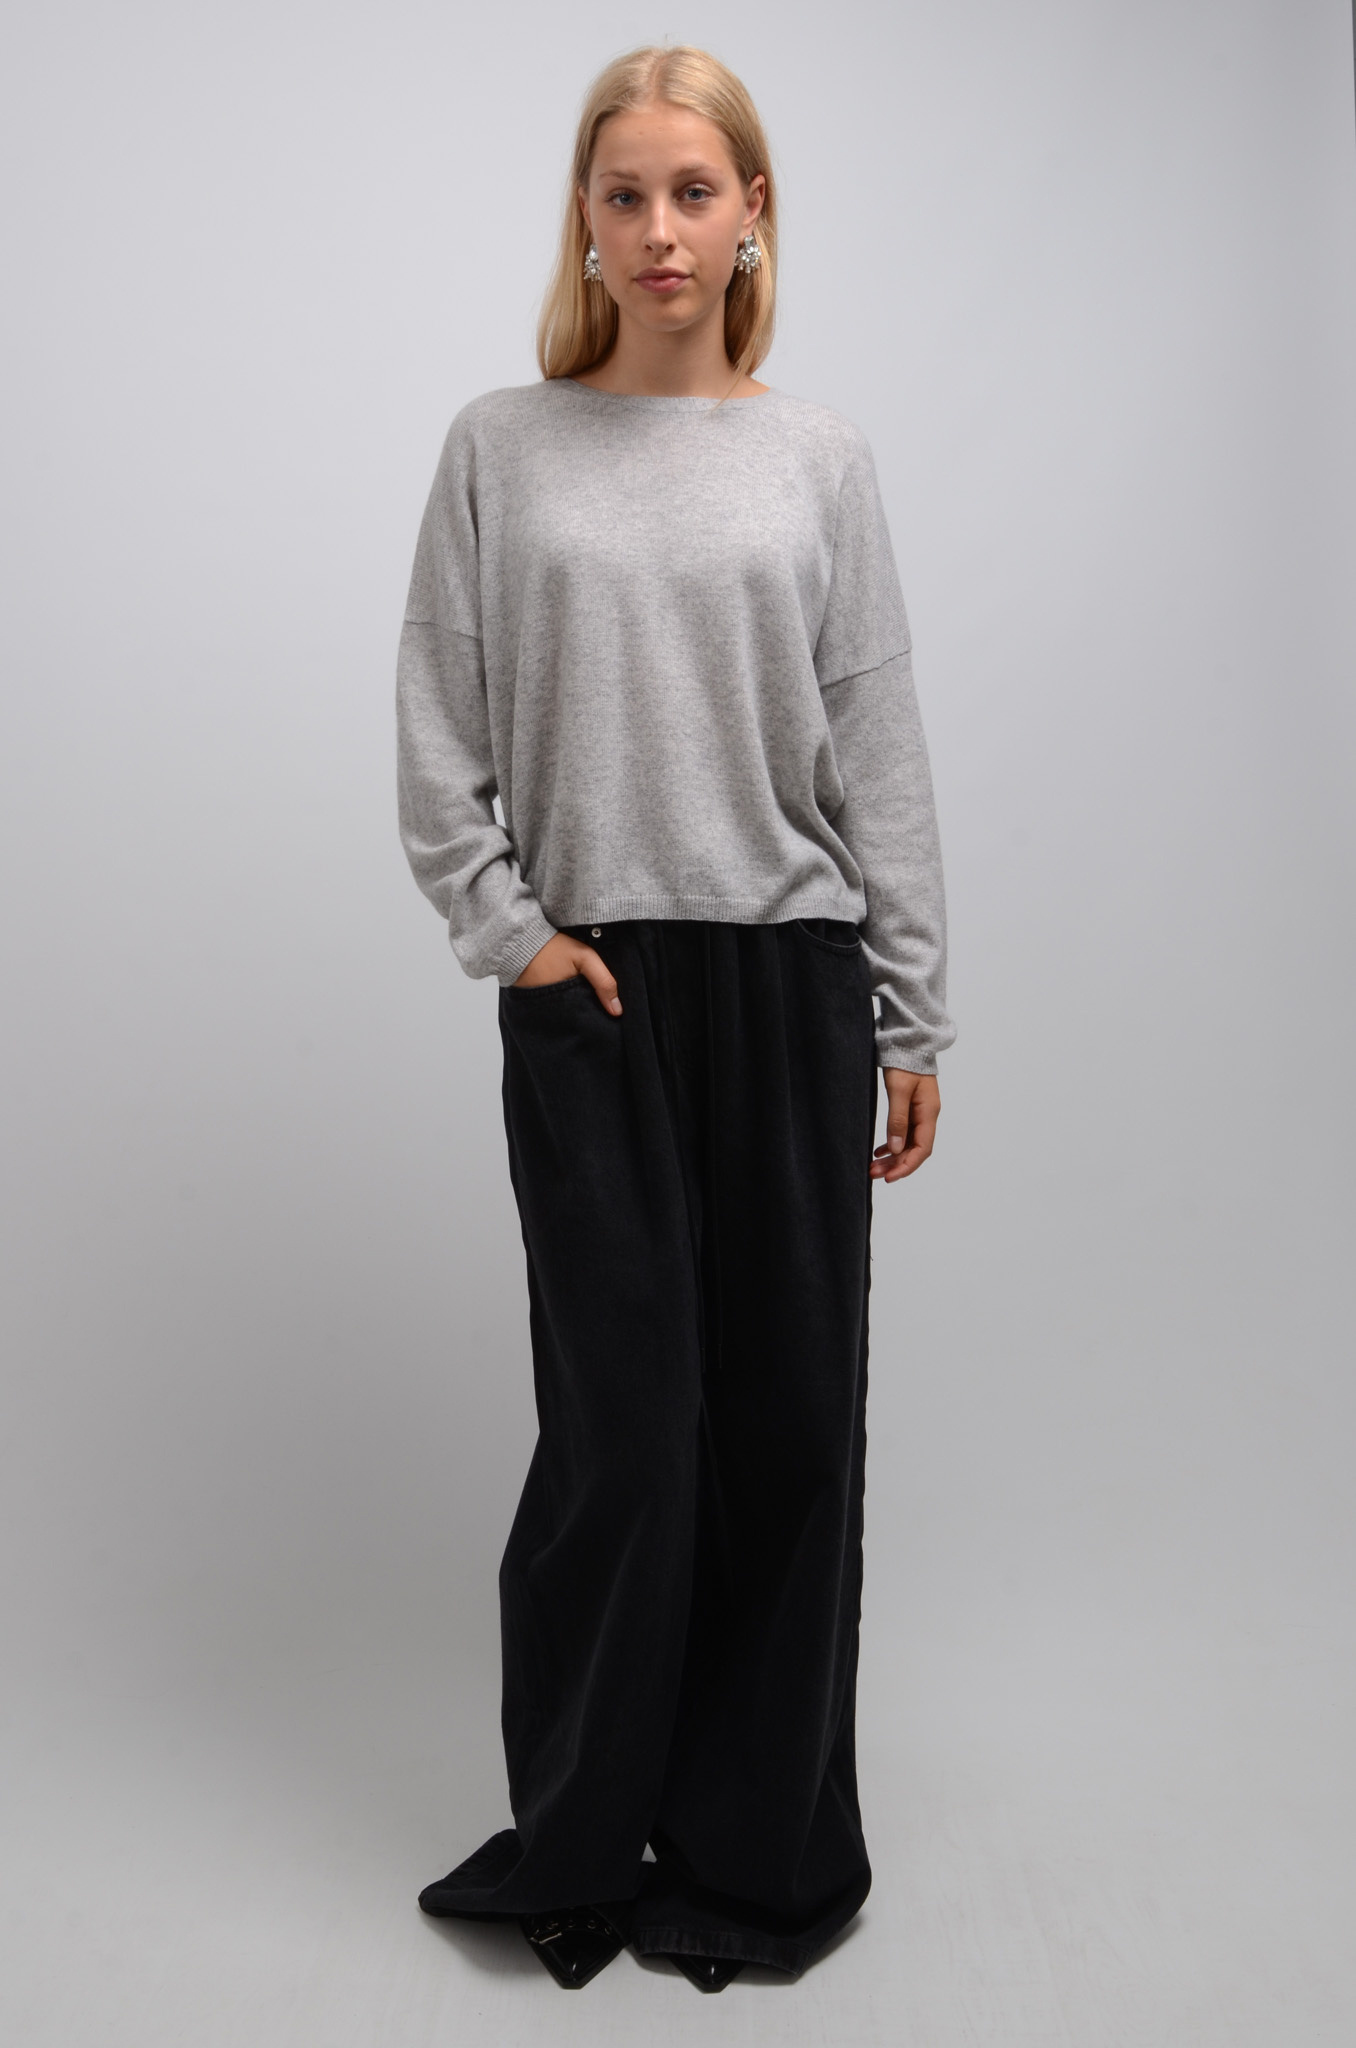 Kaira Cashmere Knit in Gris Chine Clair-6